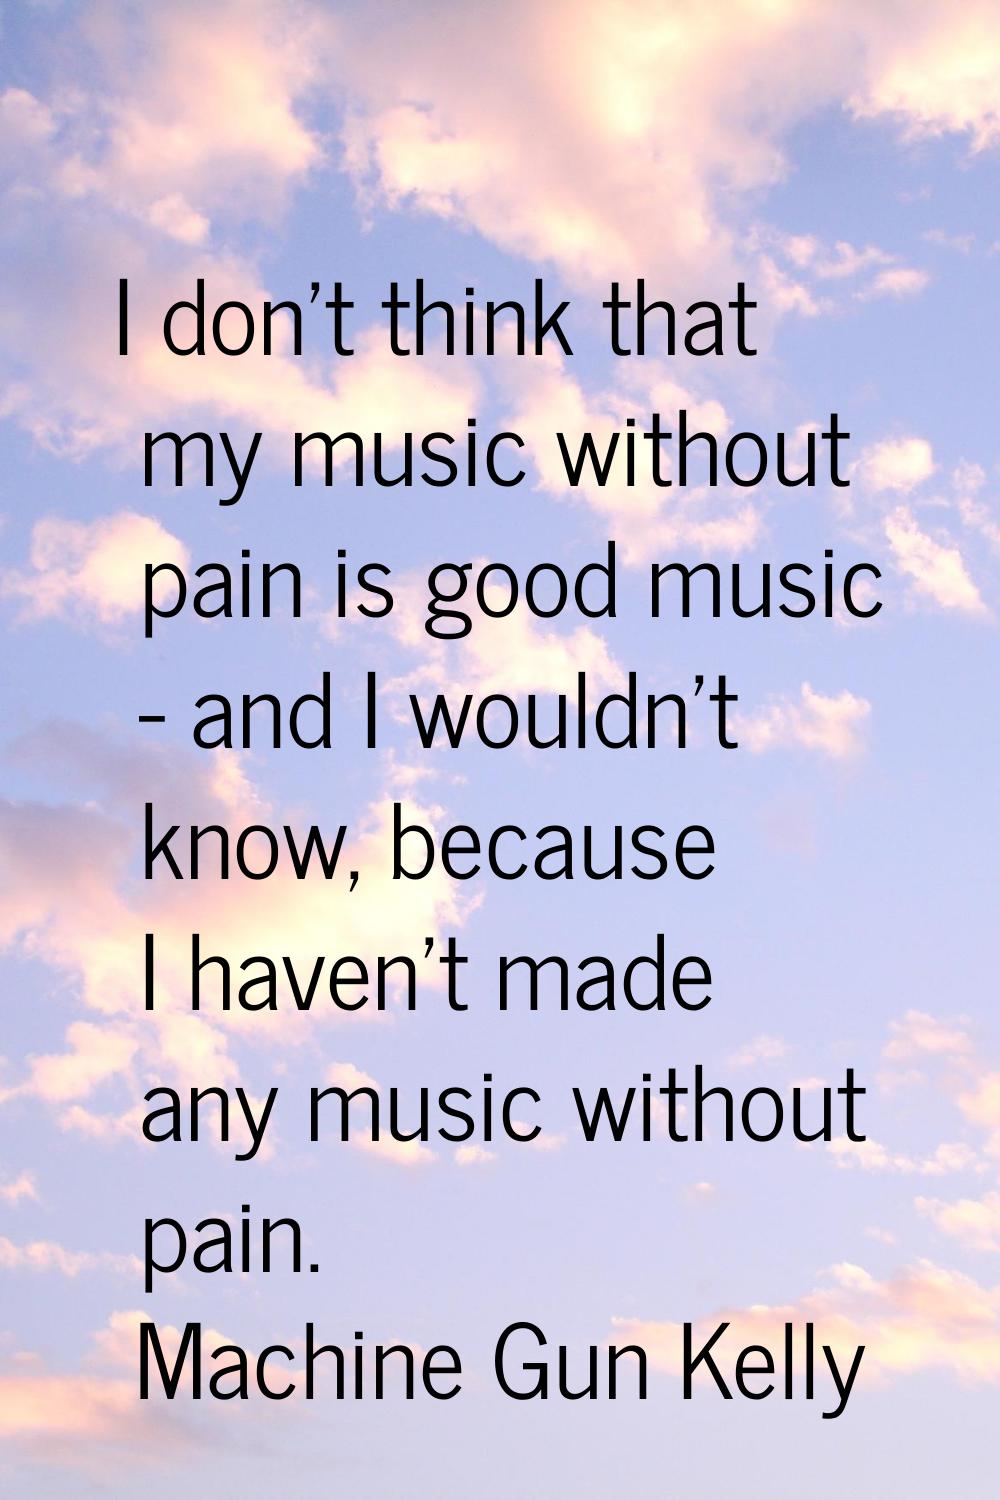 I don't think that my music without pain is good music - and I wouldn't know, because I haven't mad